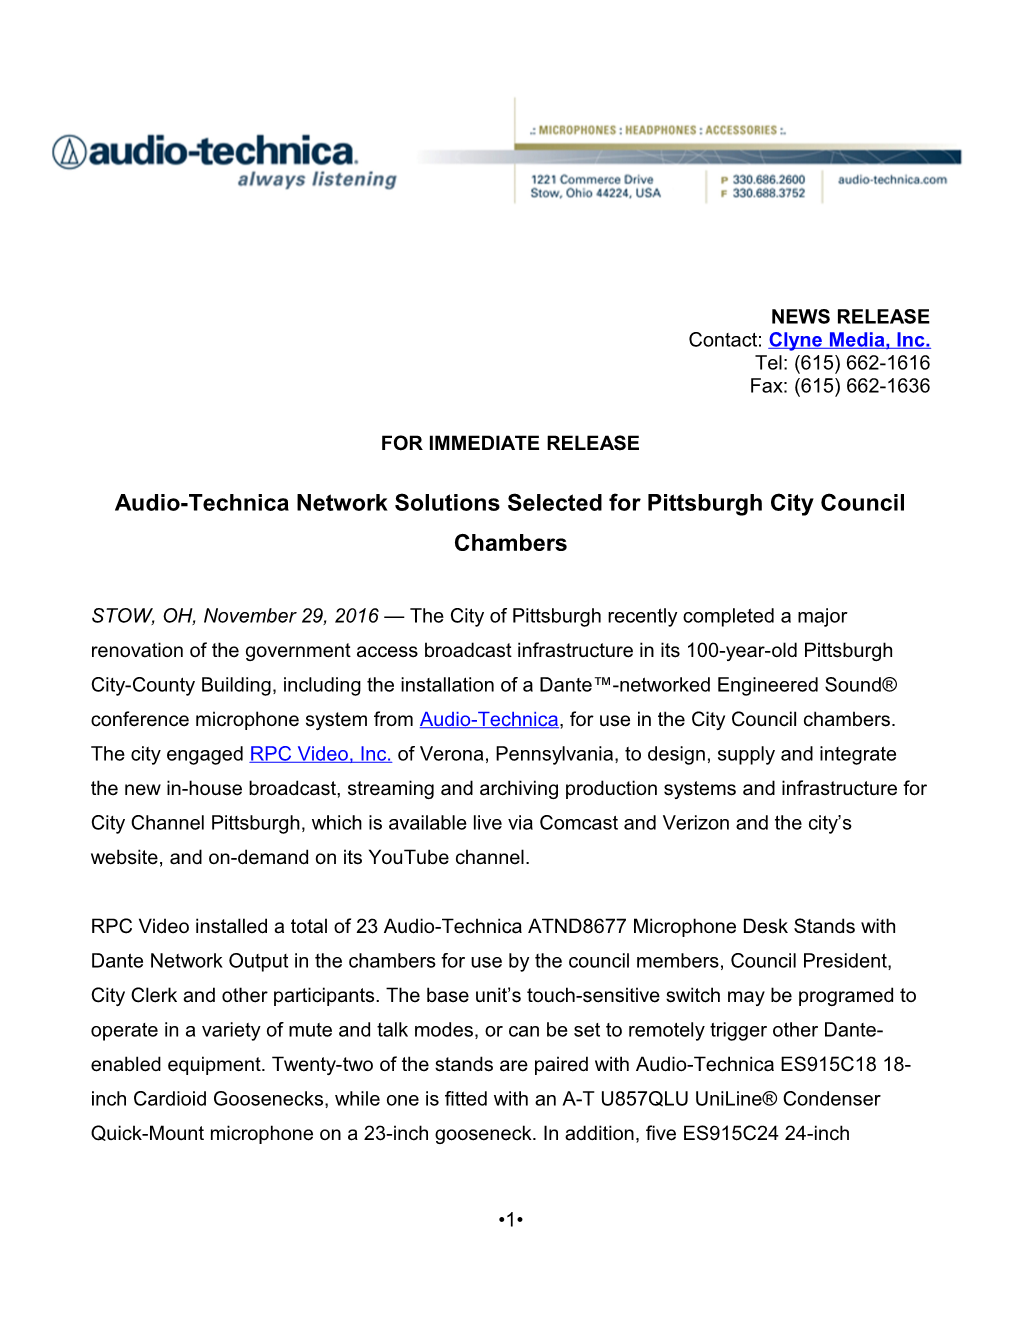 Audio-Technica Network Solutions Selected for Pittsburgh City Council Chambers